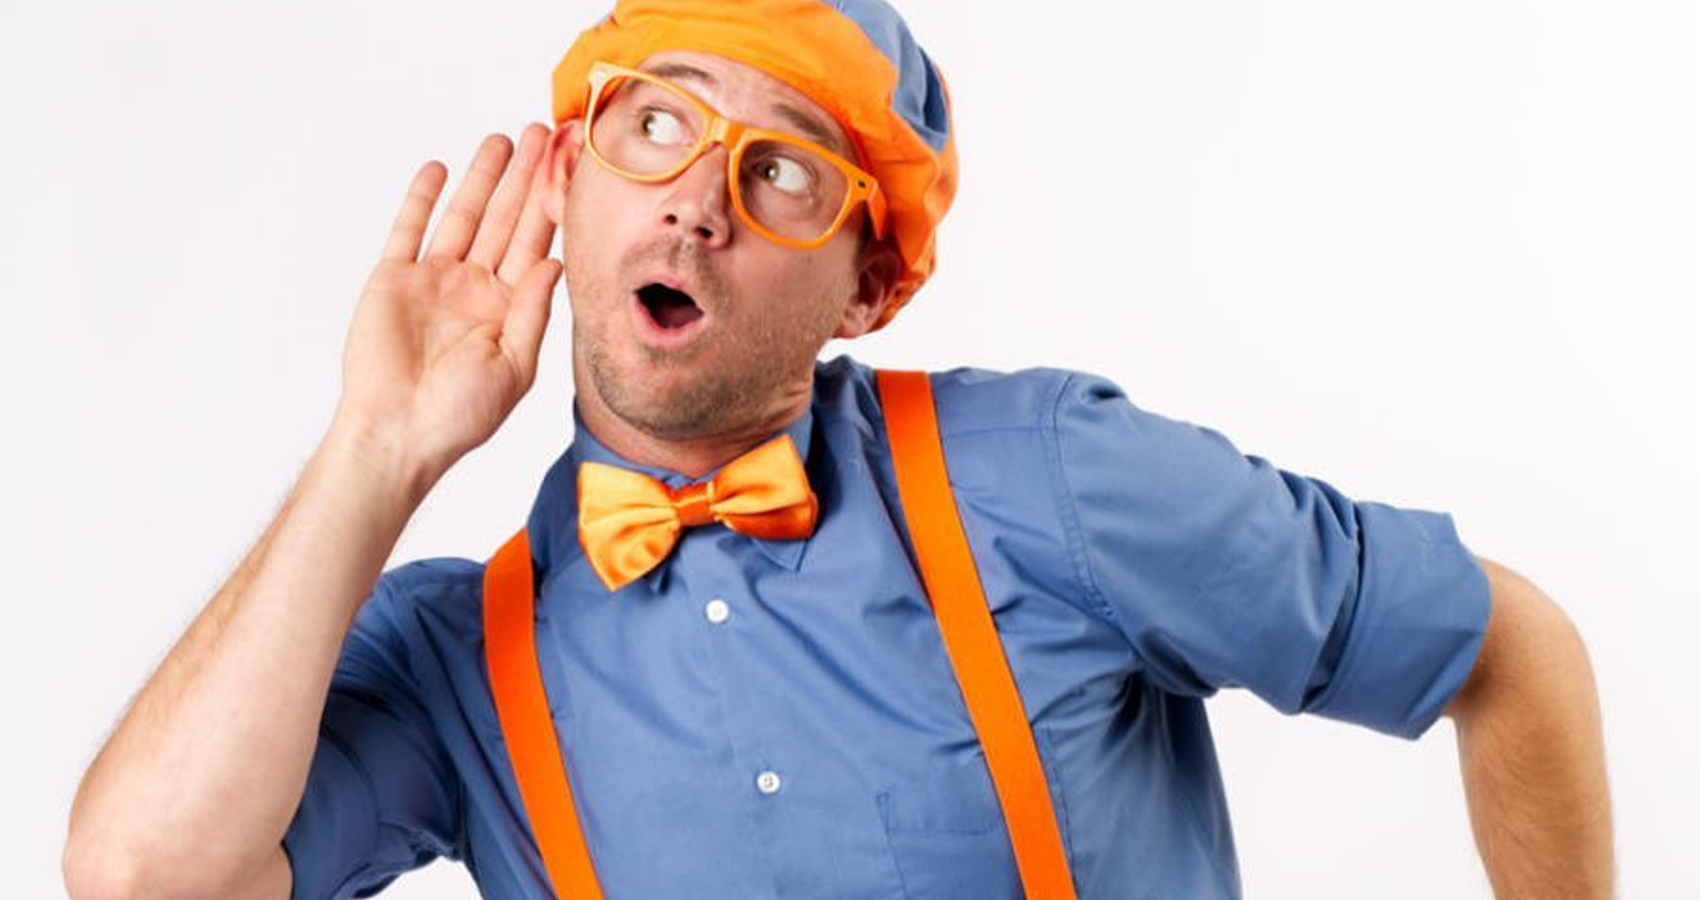 Blippi Accused Of Lying To Parents, Tour To Feature An Actor, Not Blippi